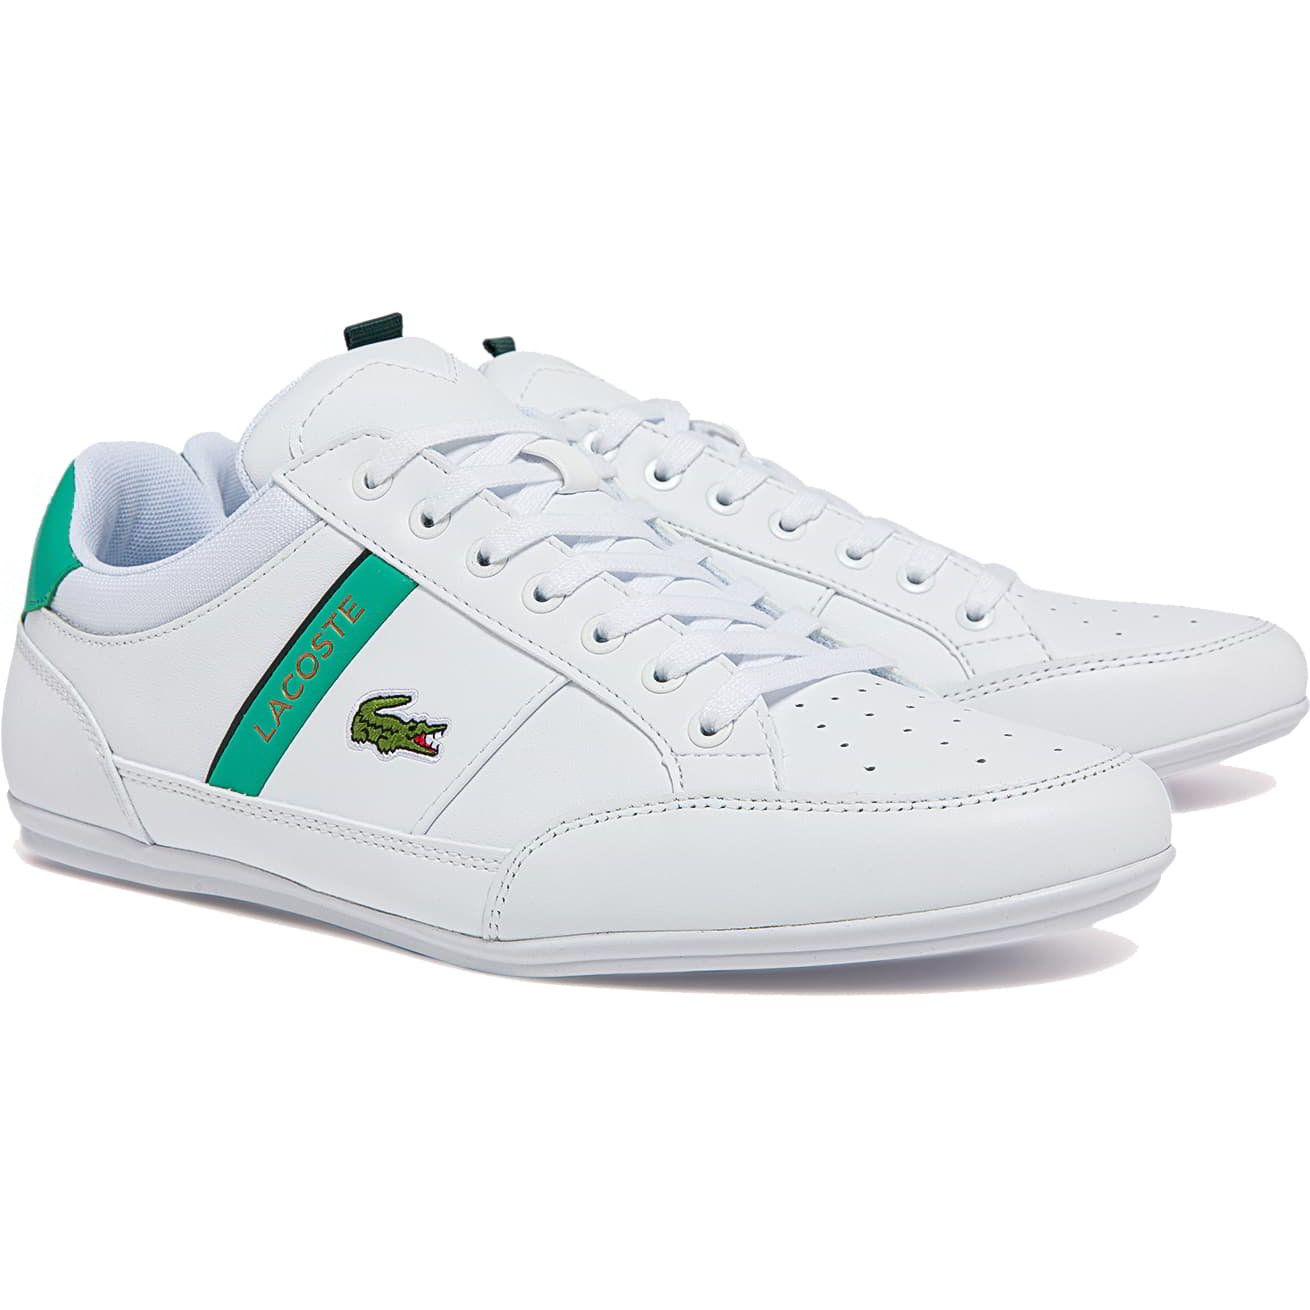 Lacoste Mens Chaymon 722-1 Leather Trainers - White Green 2951